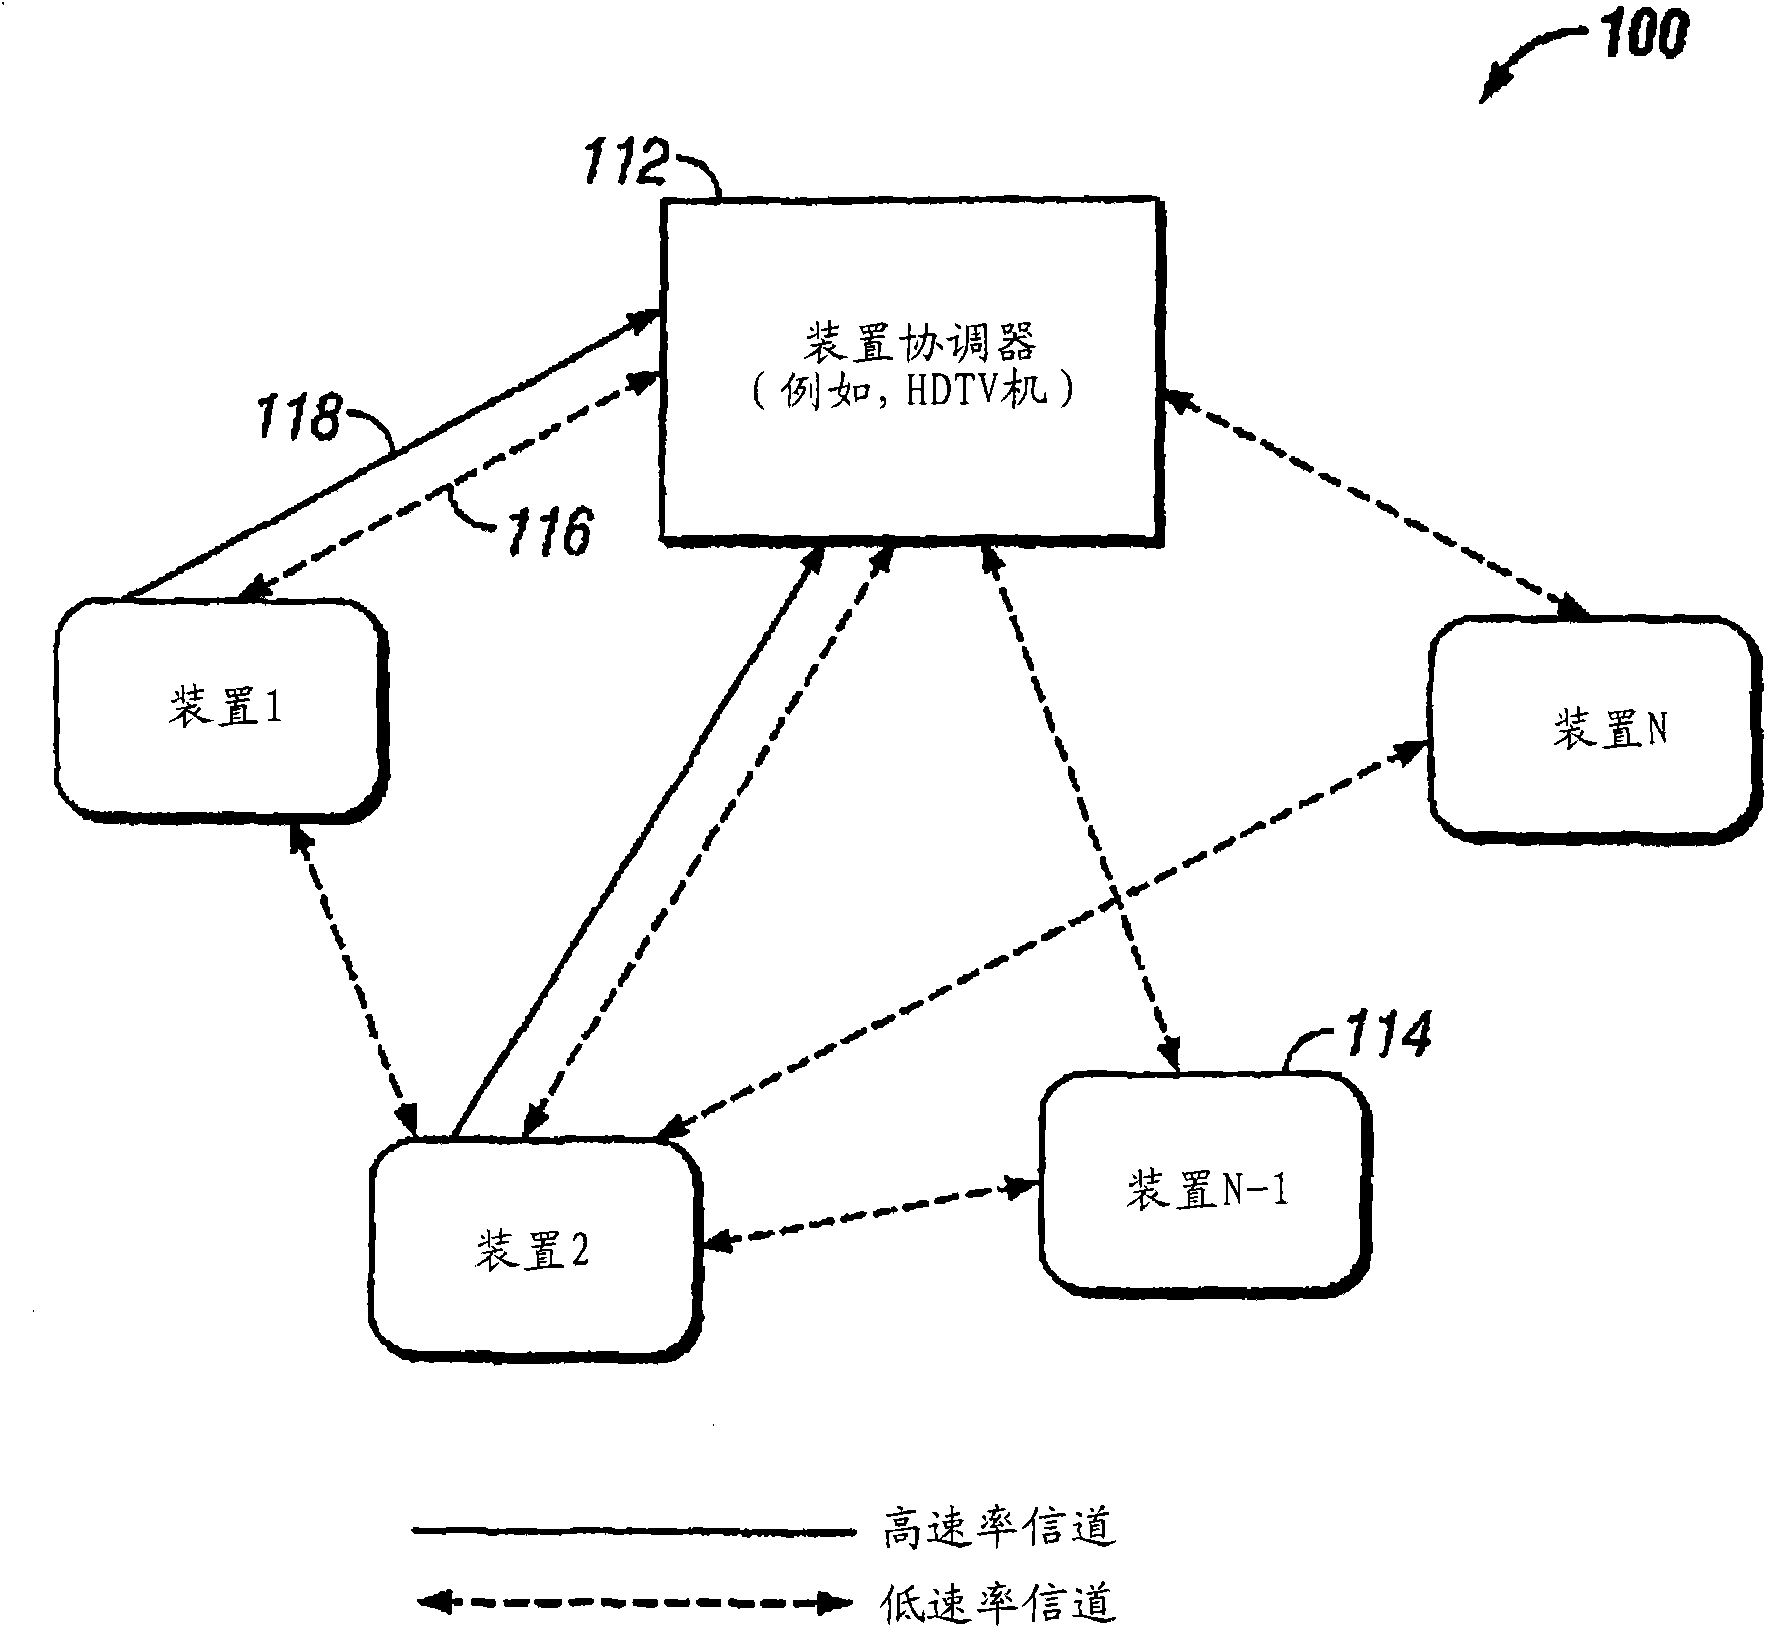 System and method for processing wireless high definition video data using a shortened last codeword